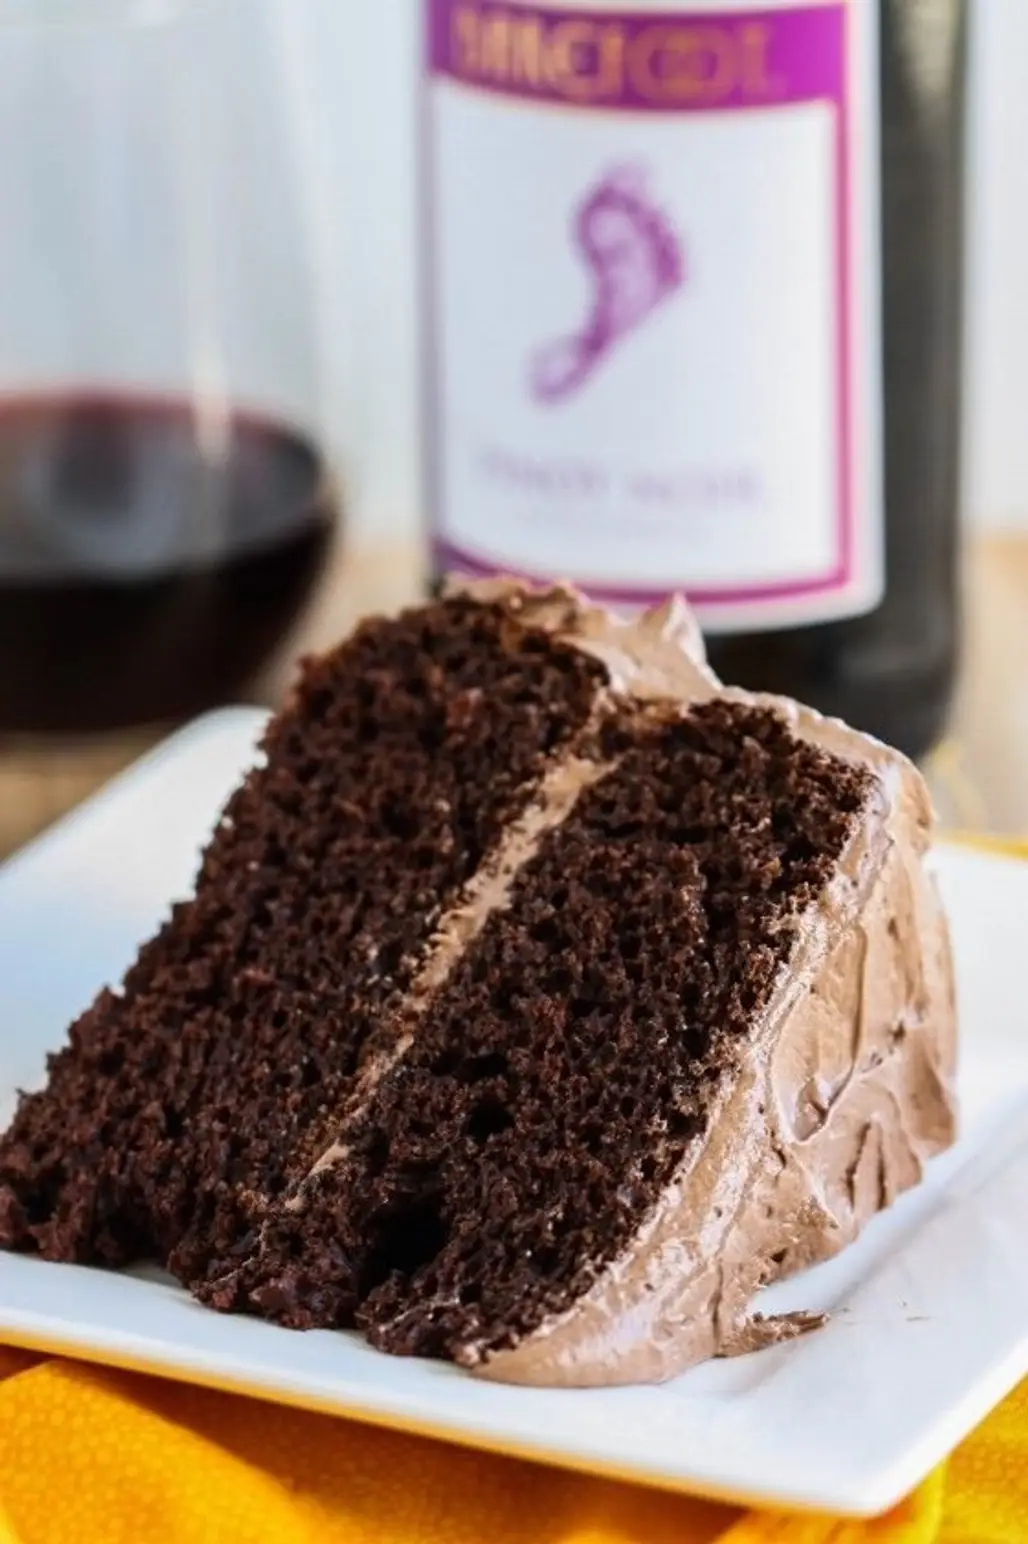 Chocolate Cake with Pinot Noir Frosting